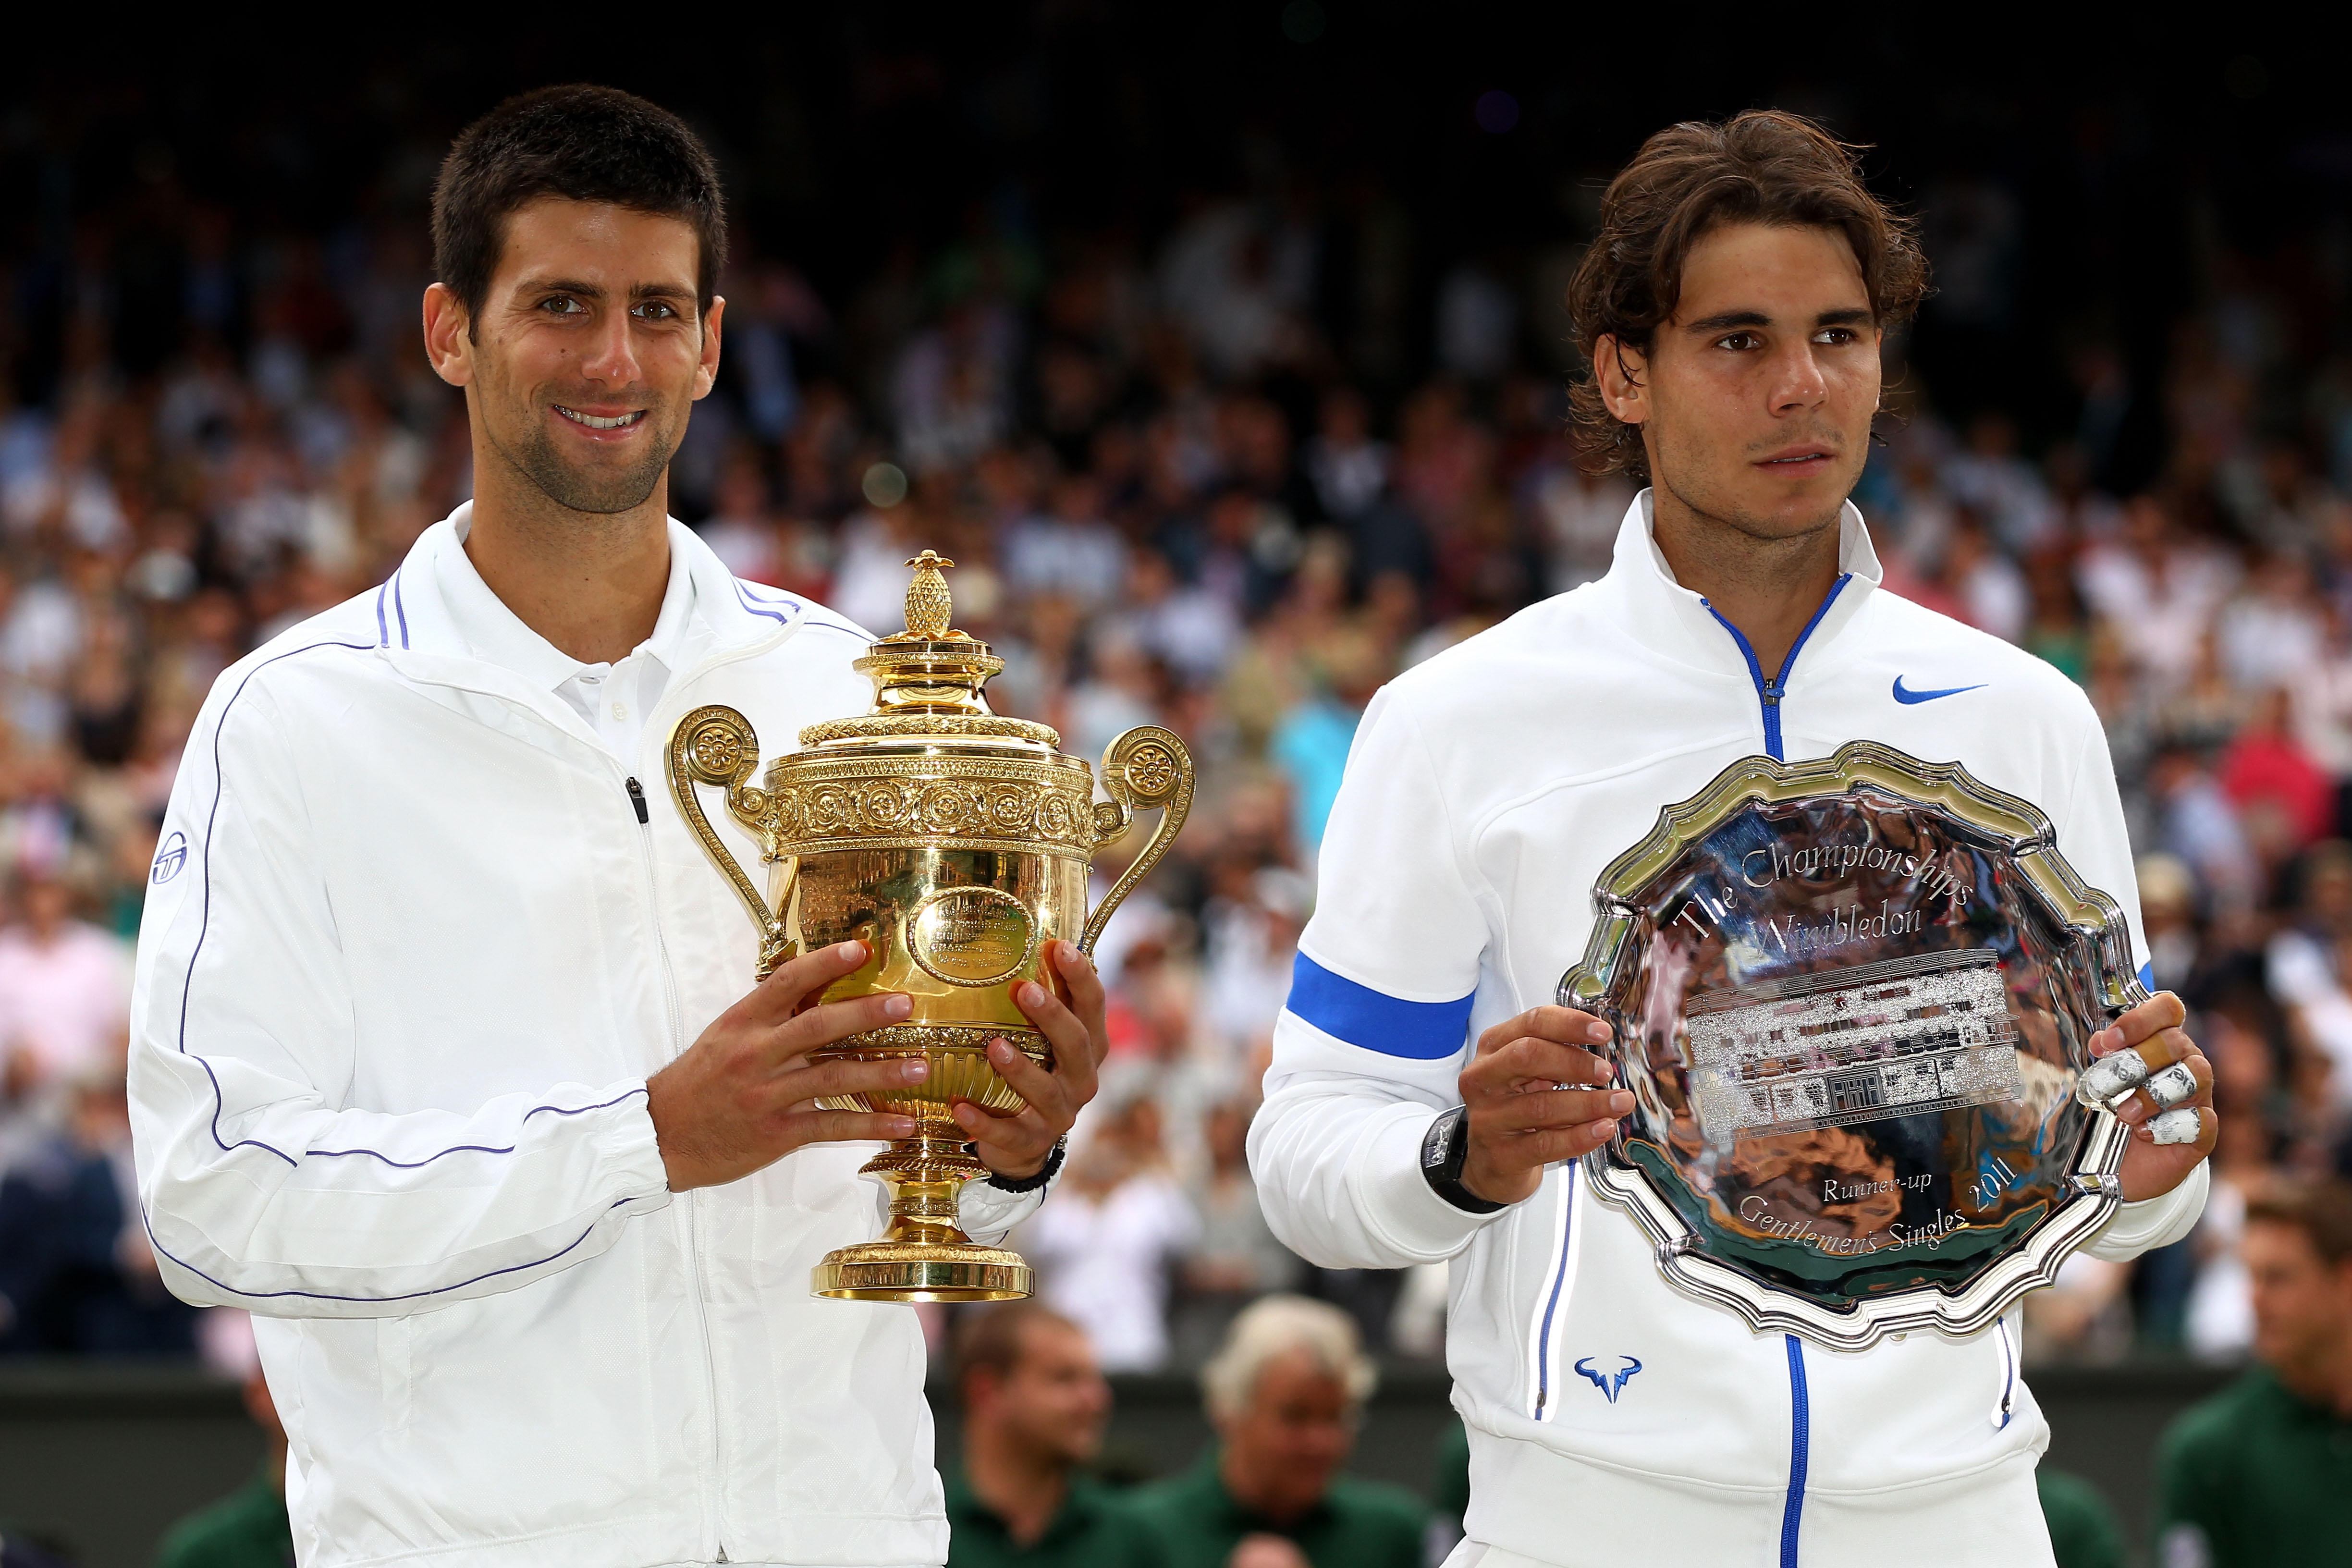 A look at the numbers ahead of Djokovic and Nadal's clash at Wimbledon